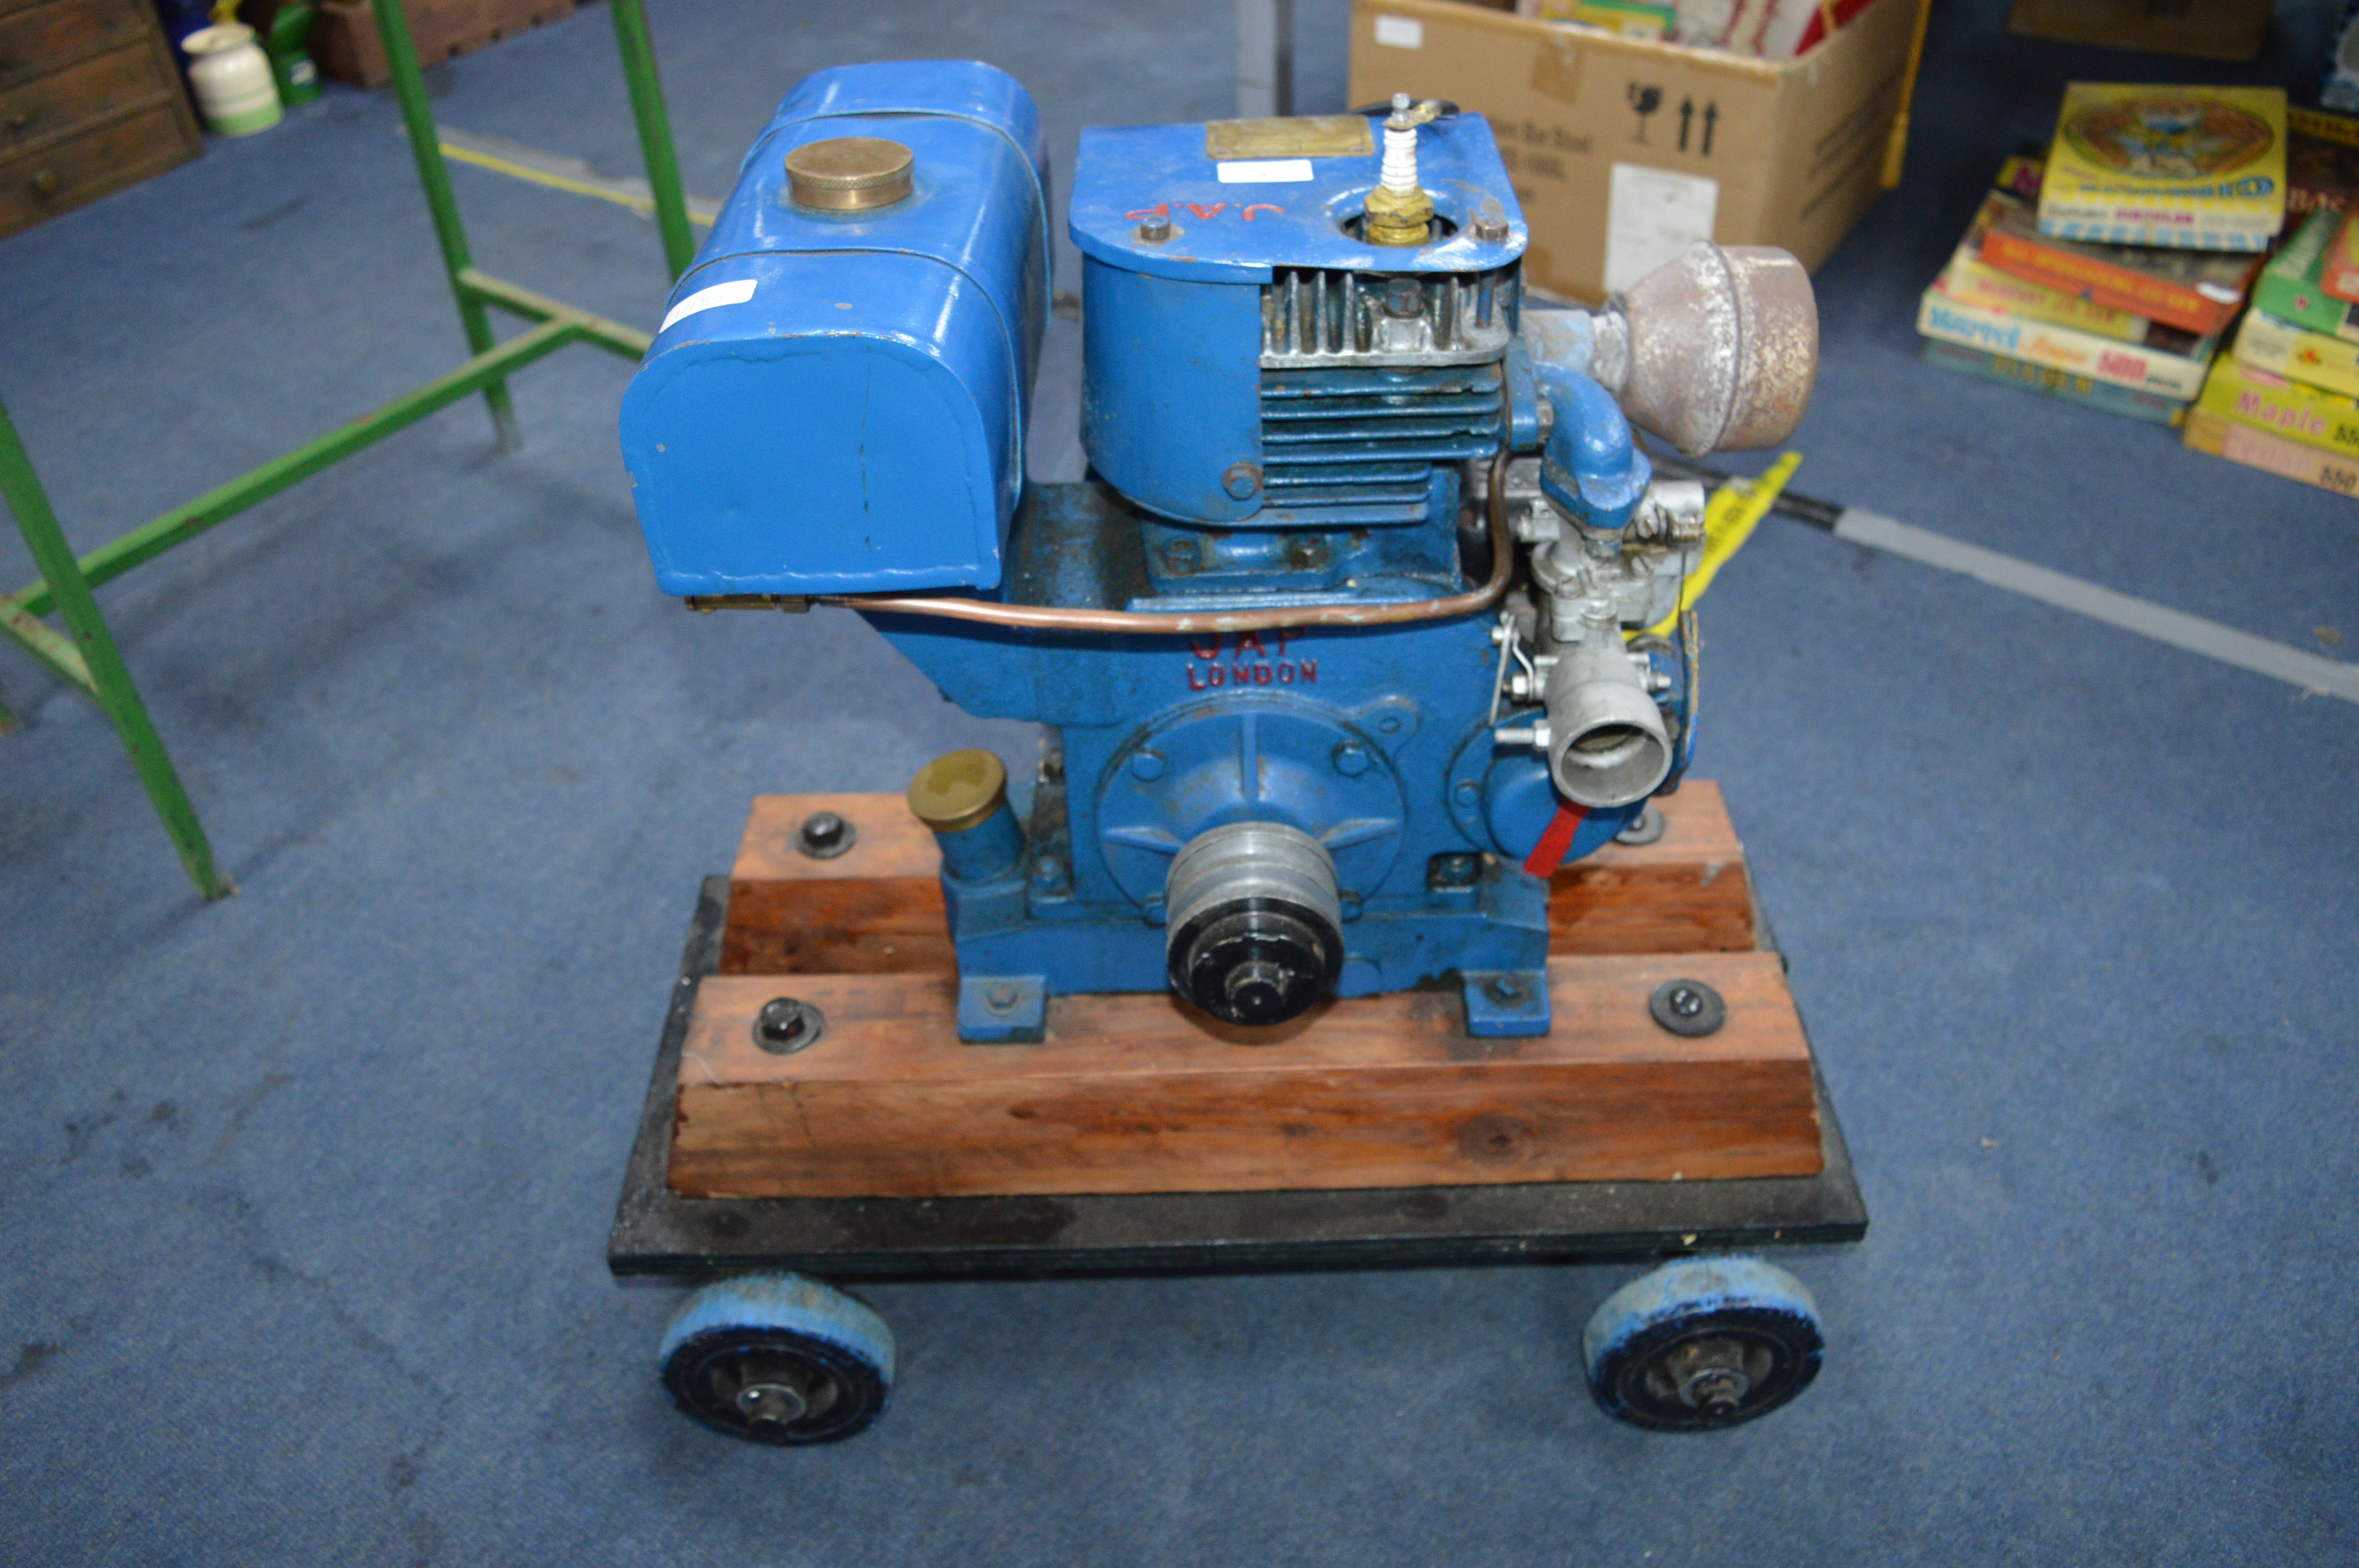 Jap Model 4/2 Stationary Engine Mounted on Trolley - Image 3 of 4